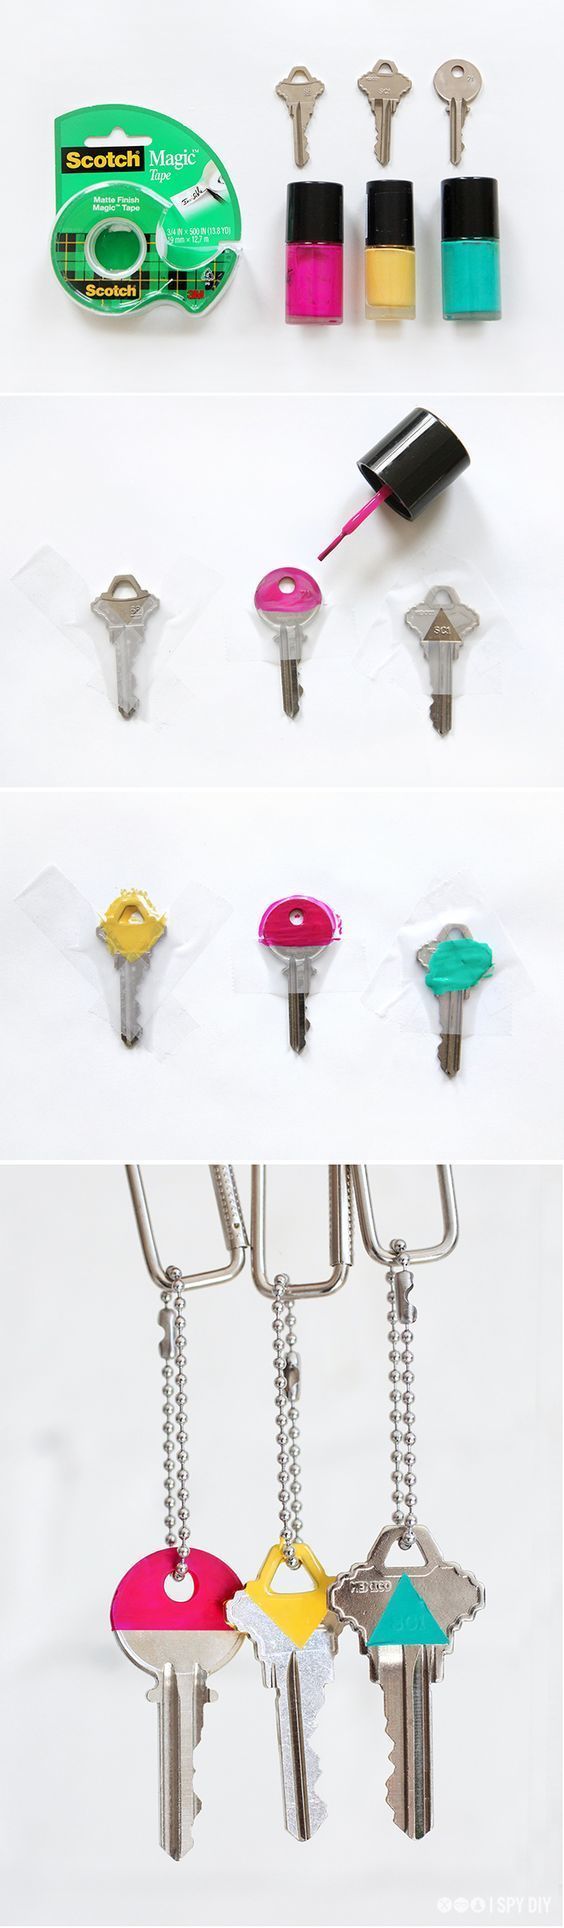 https://image.sistacafe.com/images/uploads/content_image/image/183533/1471342190-Differentiate-your-keys-by-painting-them-with-nail-polish.jpg